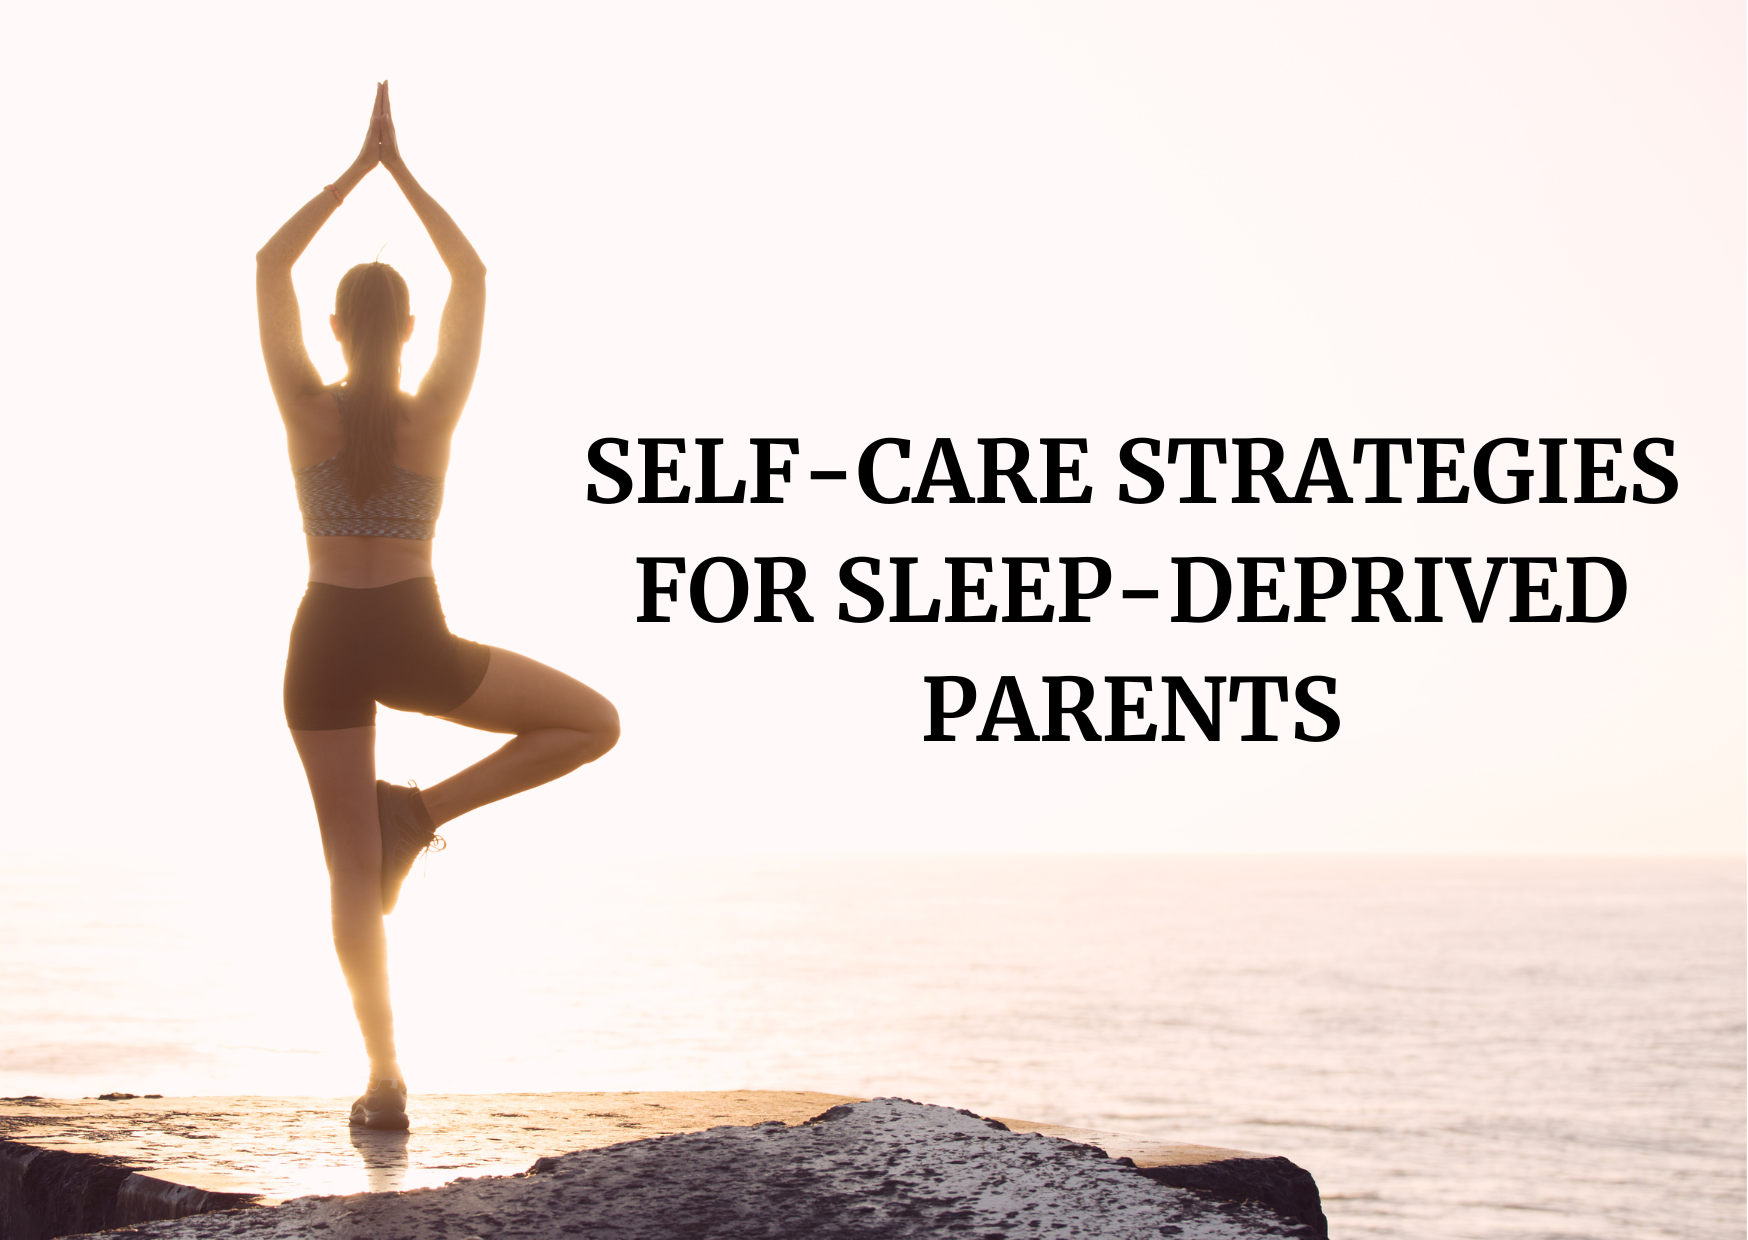 Self-Care Strategies for Sleep-Deprived Parents